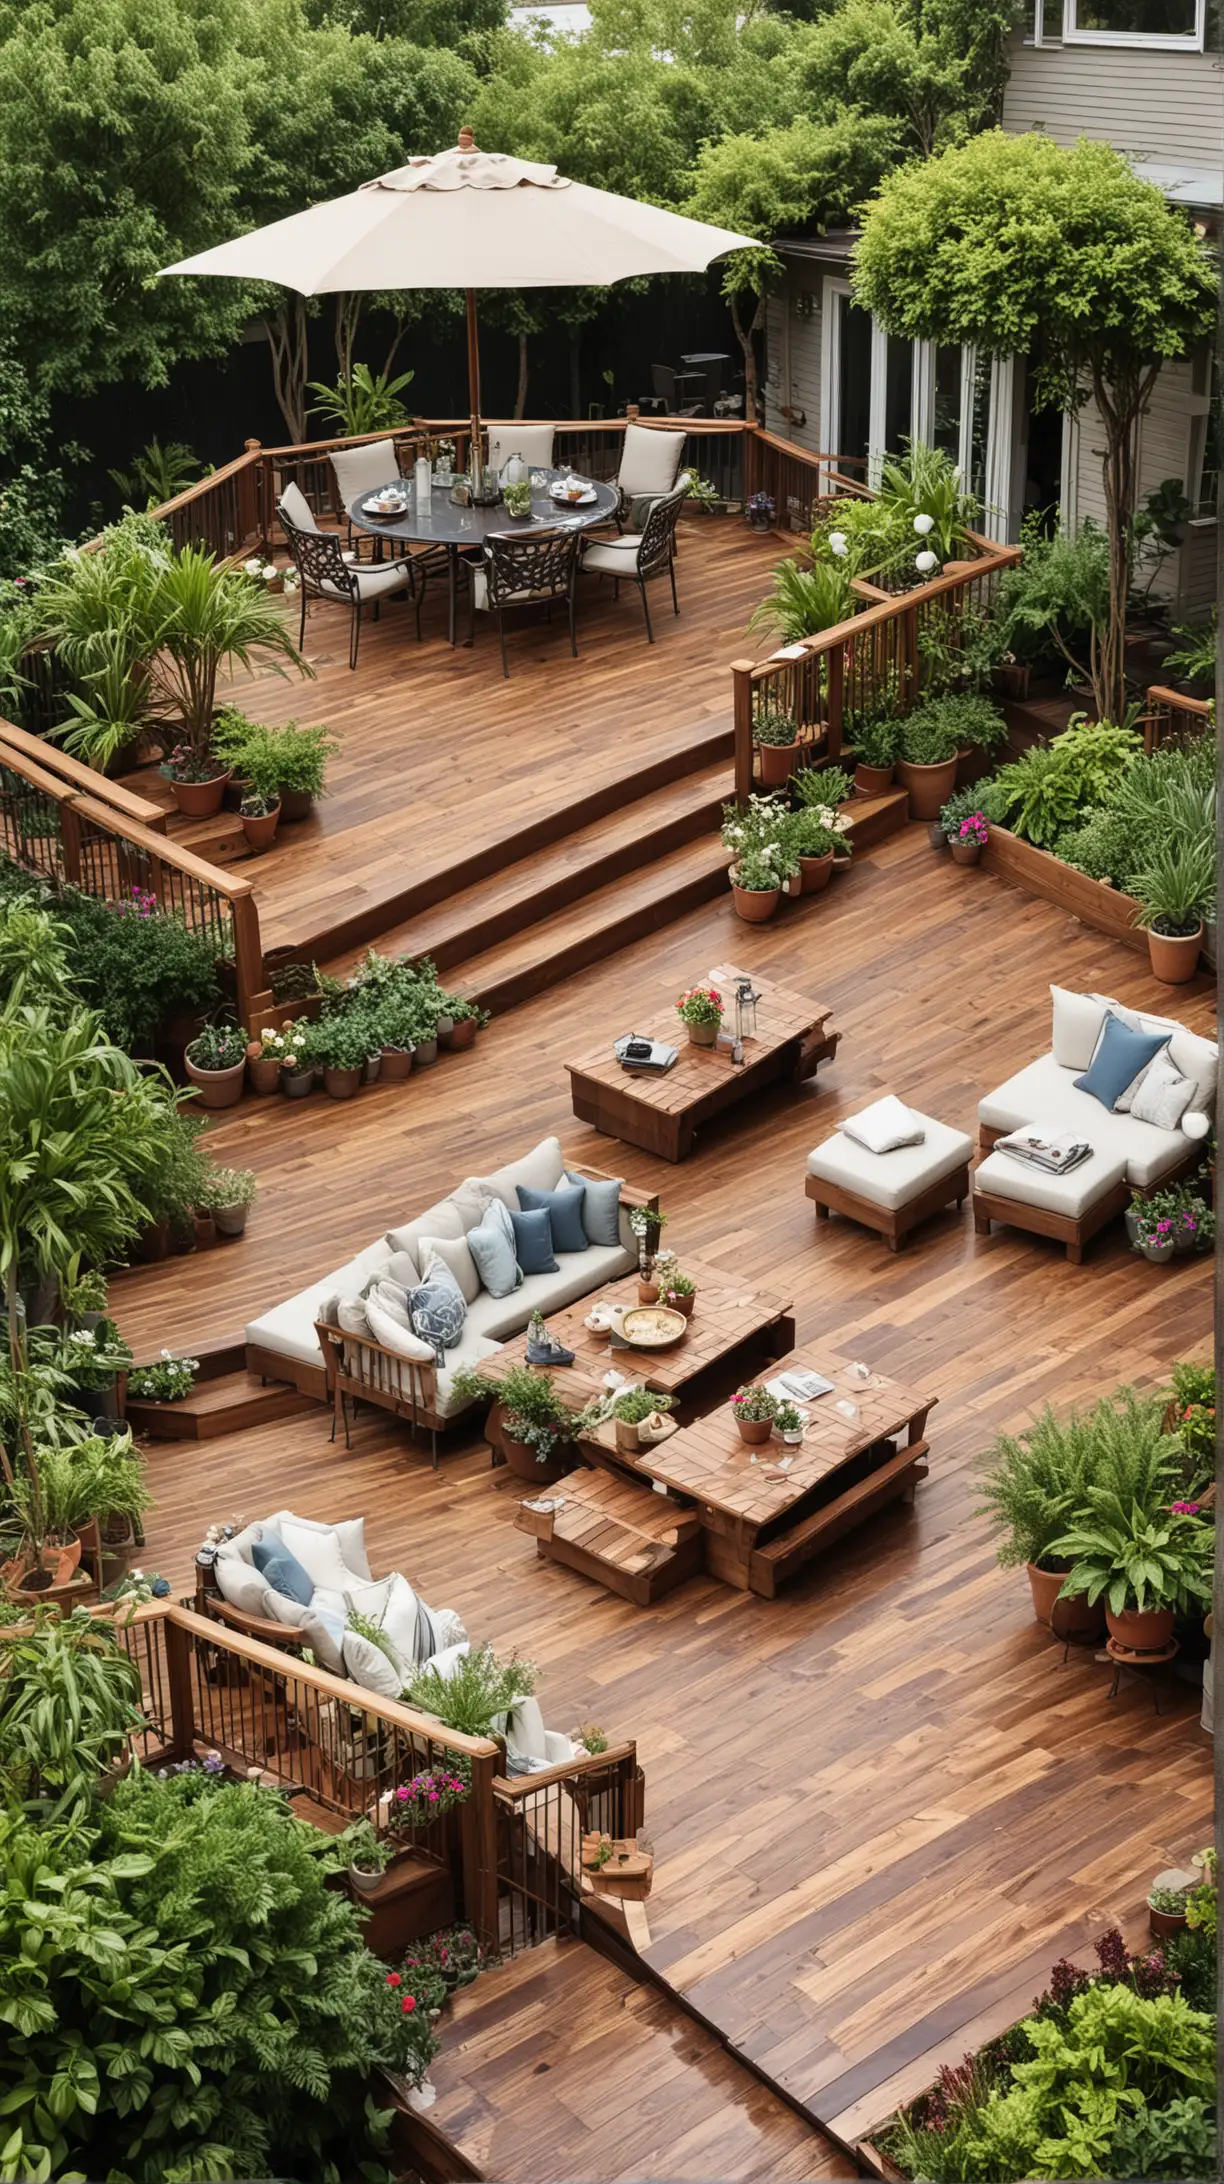 Lush Garden Deck with Elegant Outdoor Furniture and Potted Plants